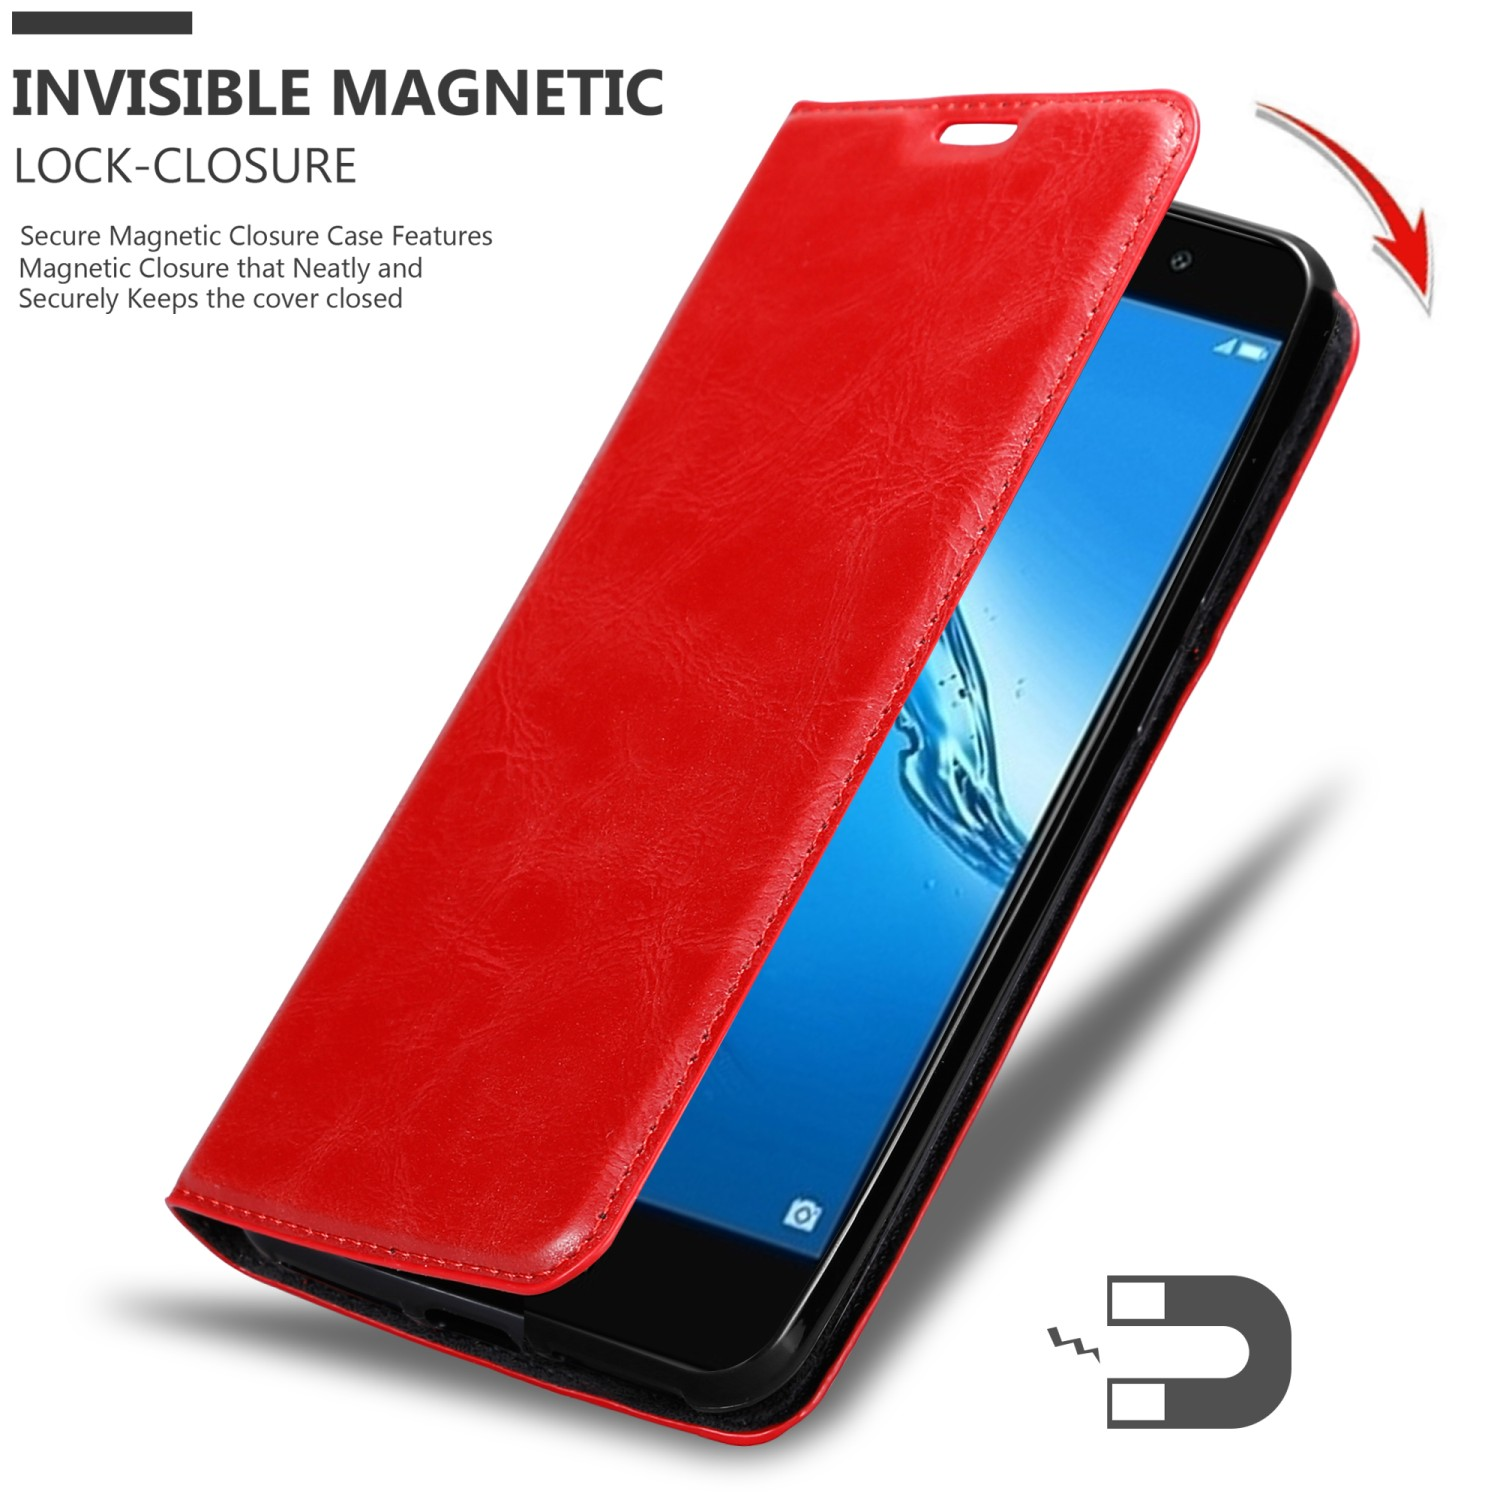 CADORABO Book APFEL Bookcover, 2017, ROT Hülle Magnet, Invisible Y7 Huawei, PRIME